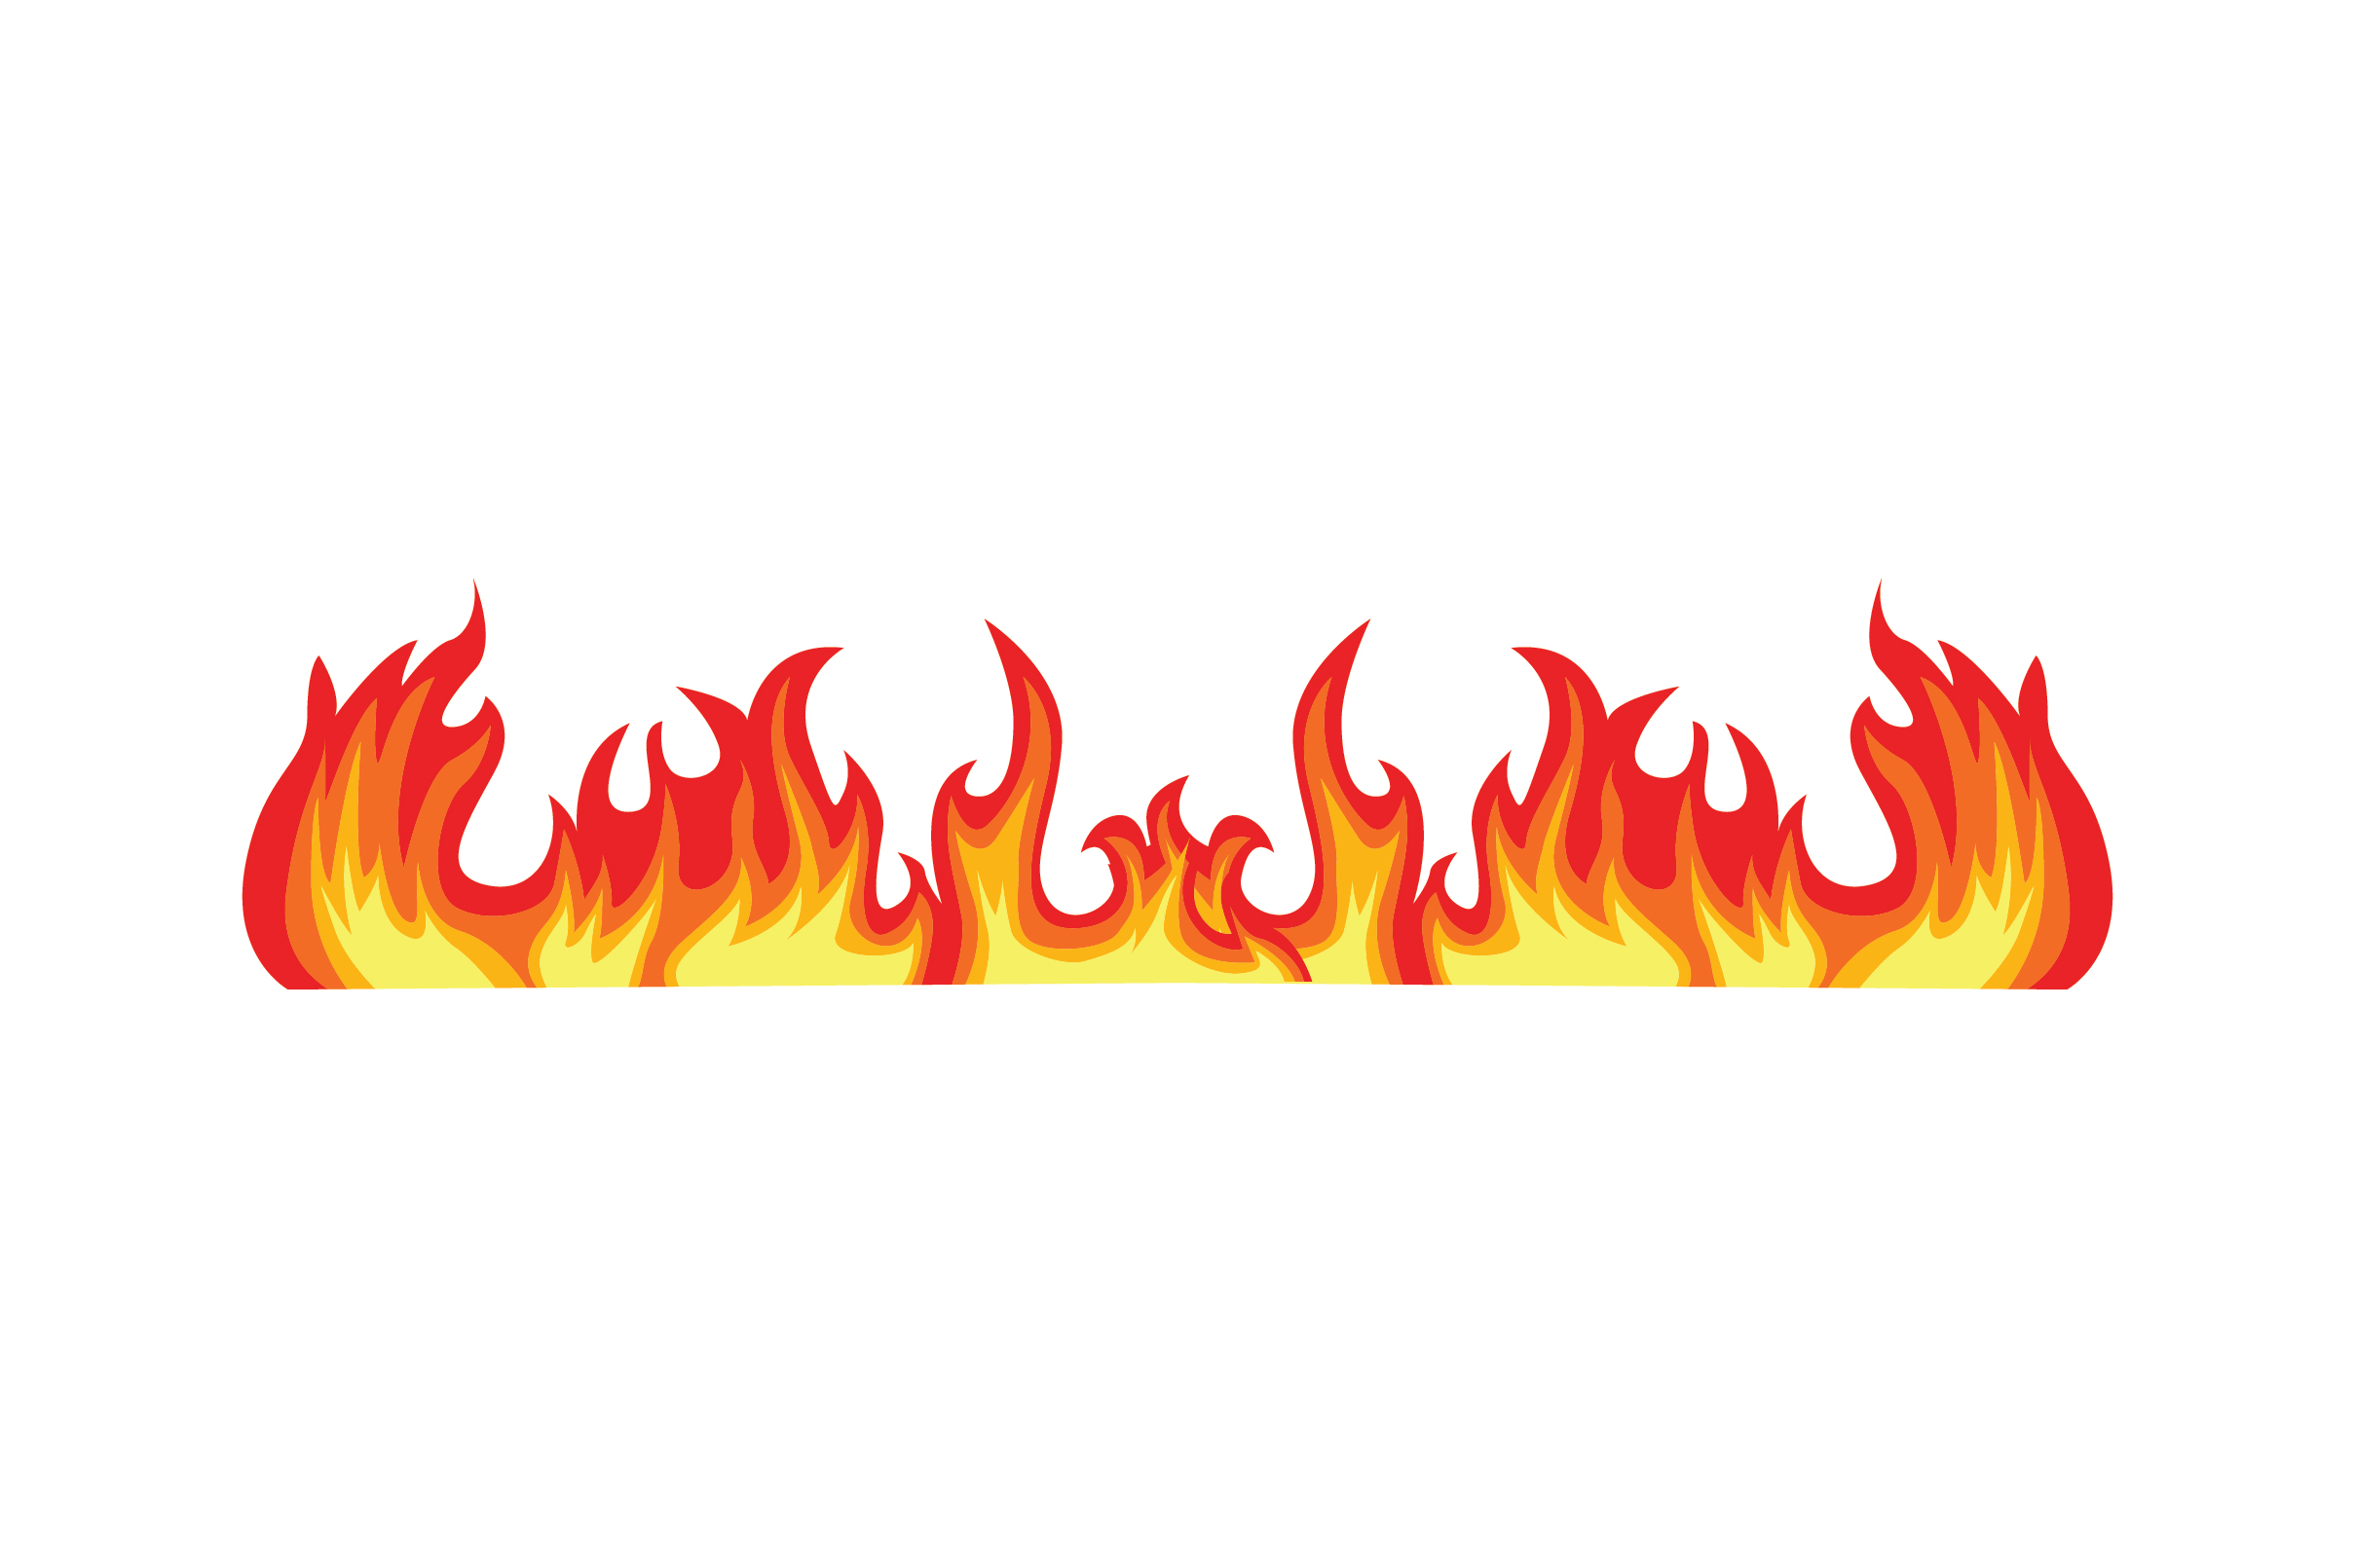 download-line-of-flames-svg-file-download-free-vector-icons-svg-psd-png-eps-icon-font